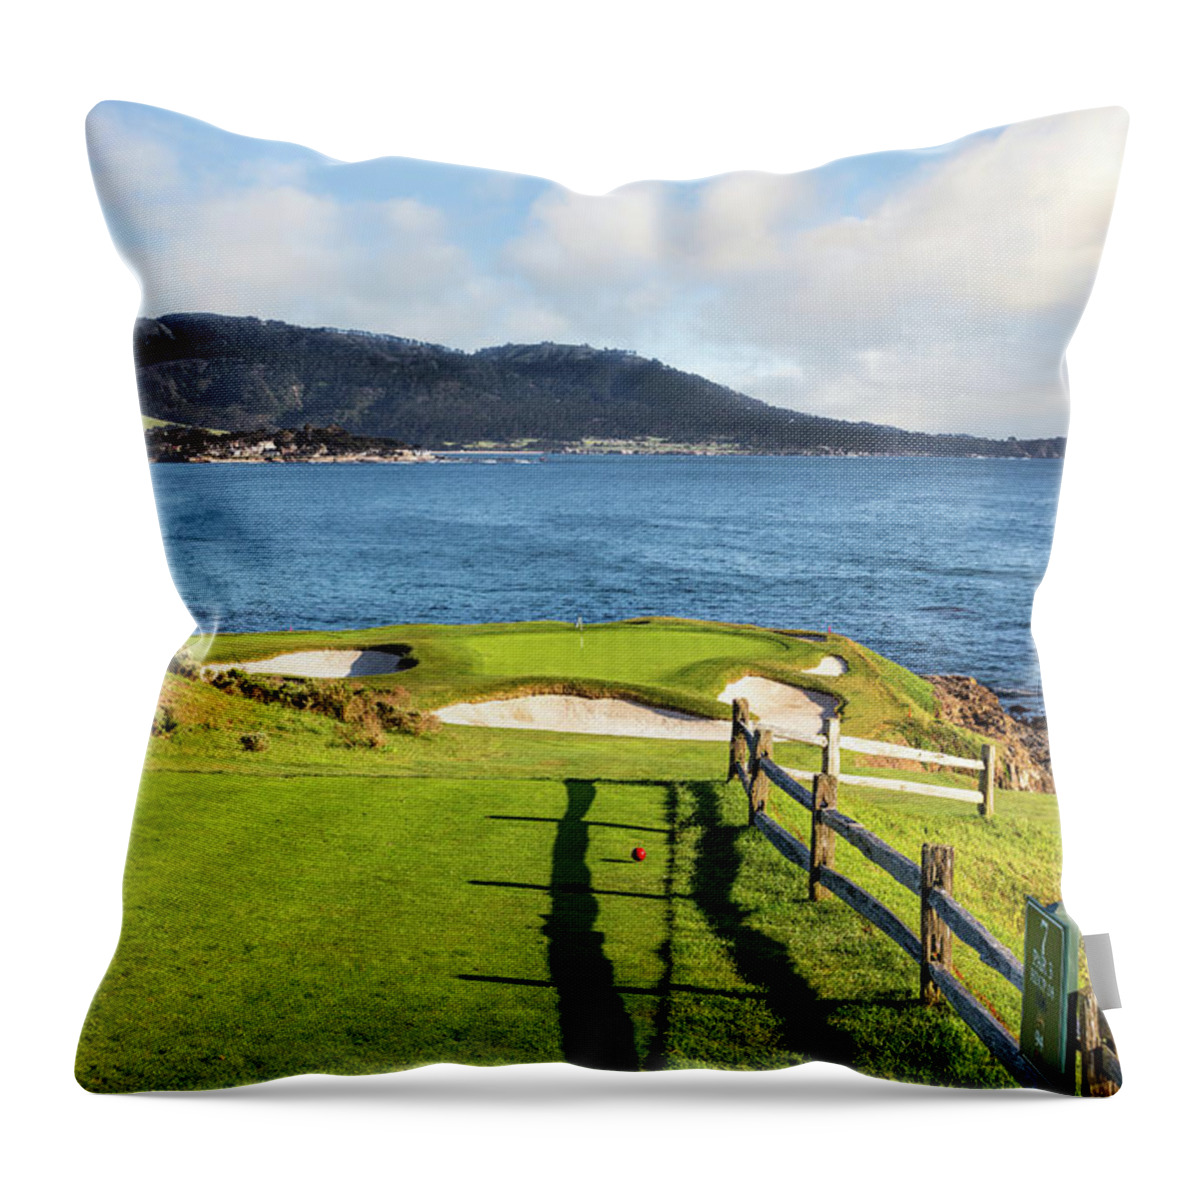 Pebble Beach Golf Course Throw Pillow featuring the photograph Hole 7 at Pebble Beach Golf Resort by Mike Centioli